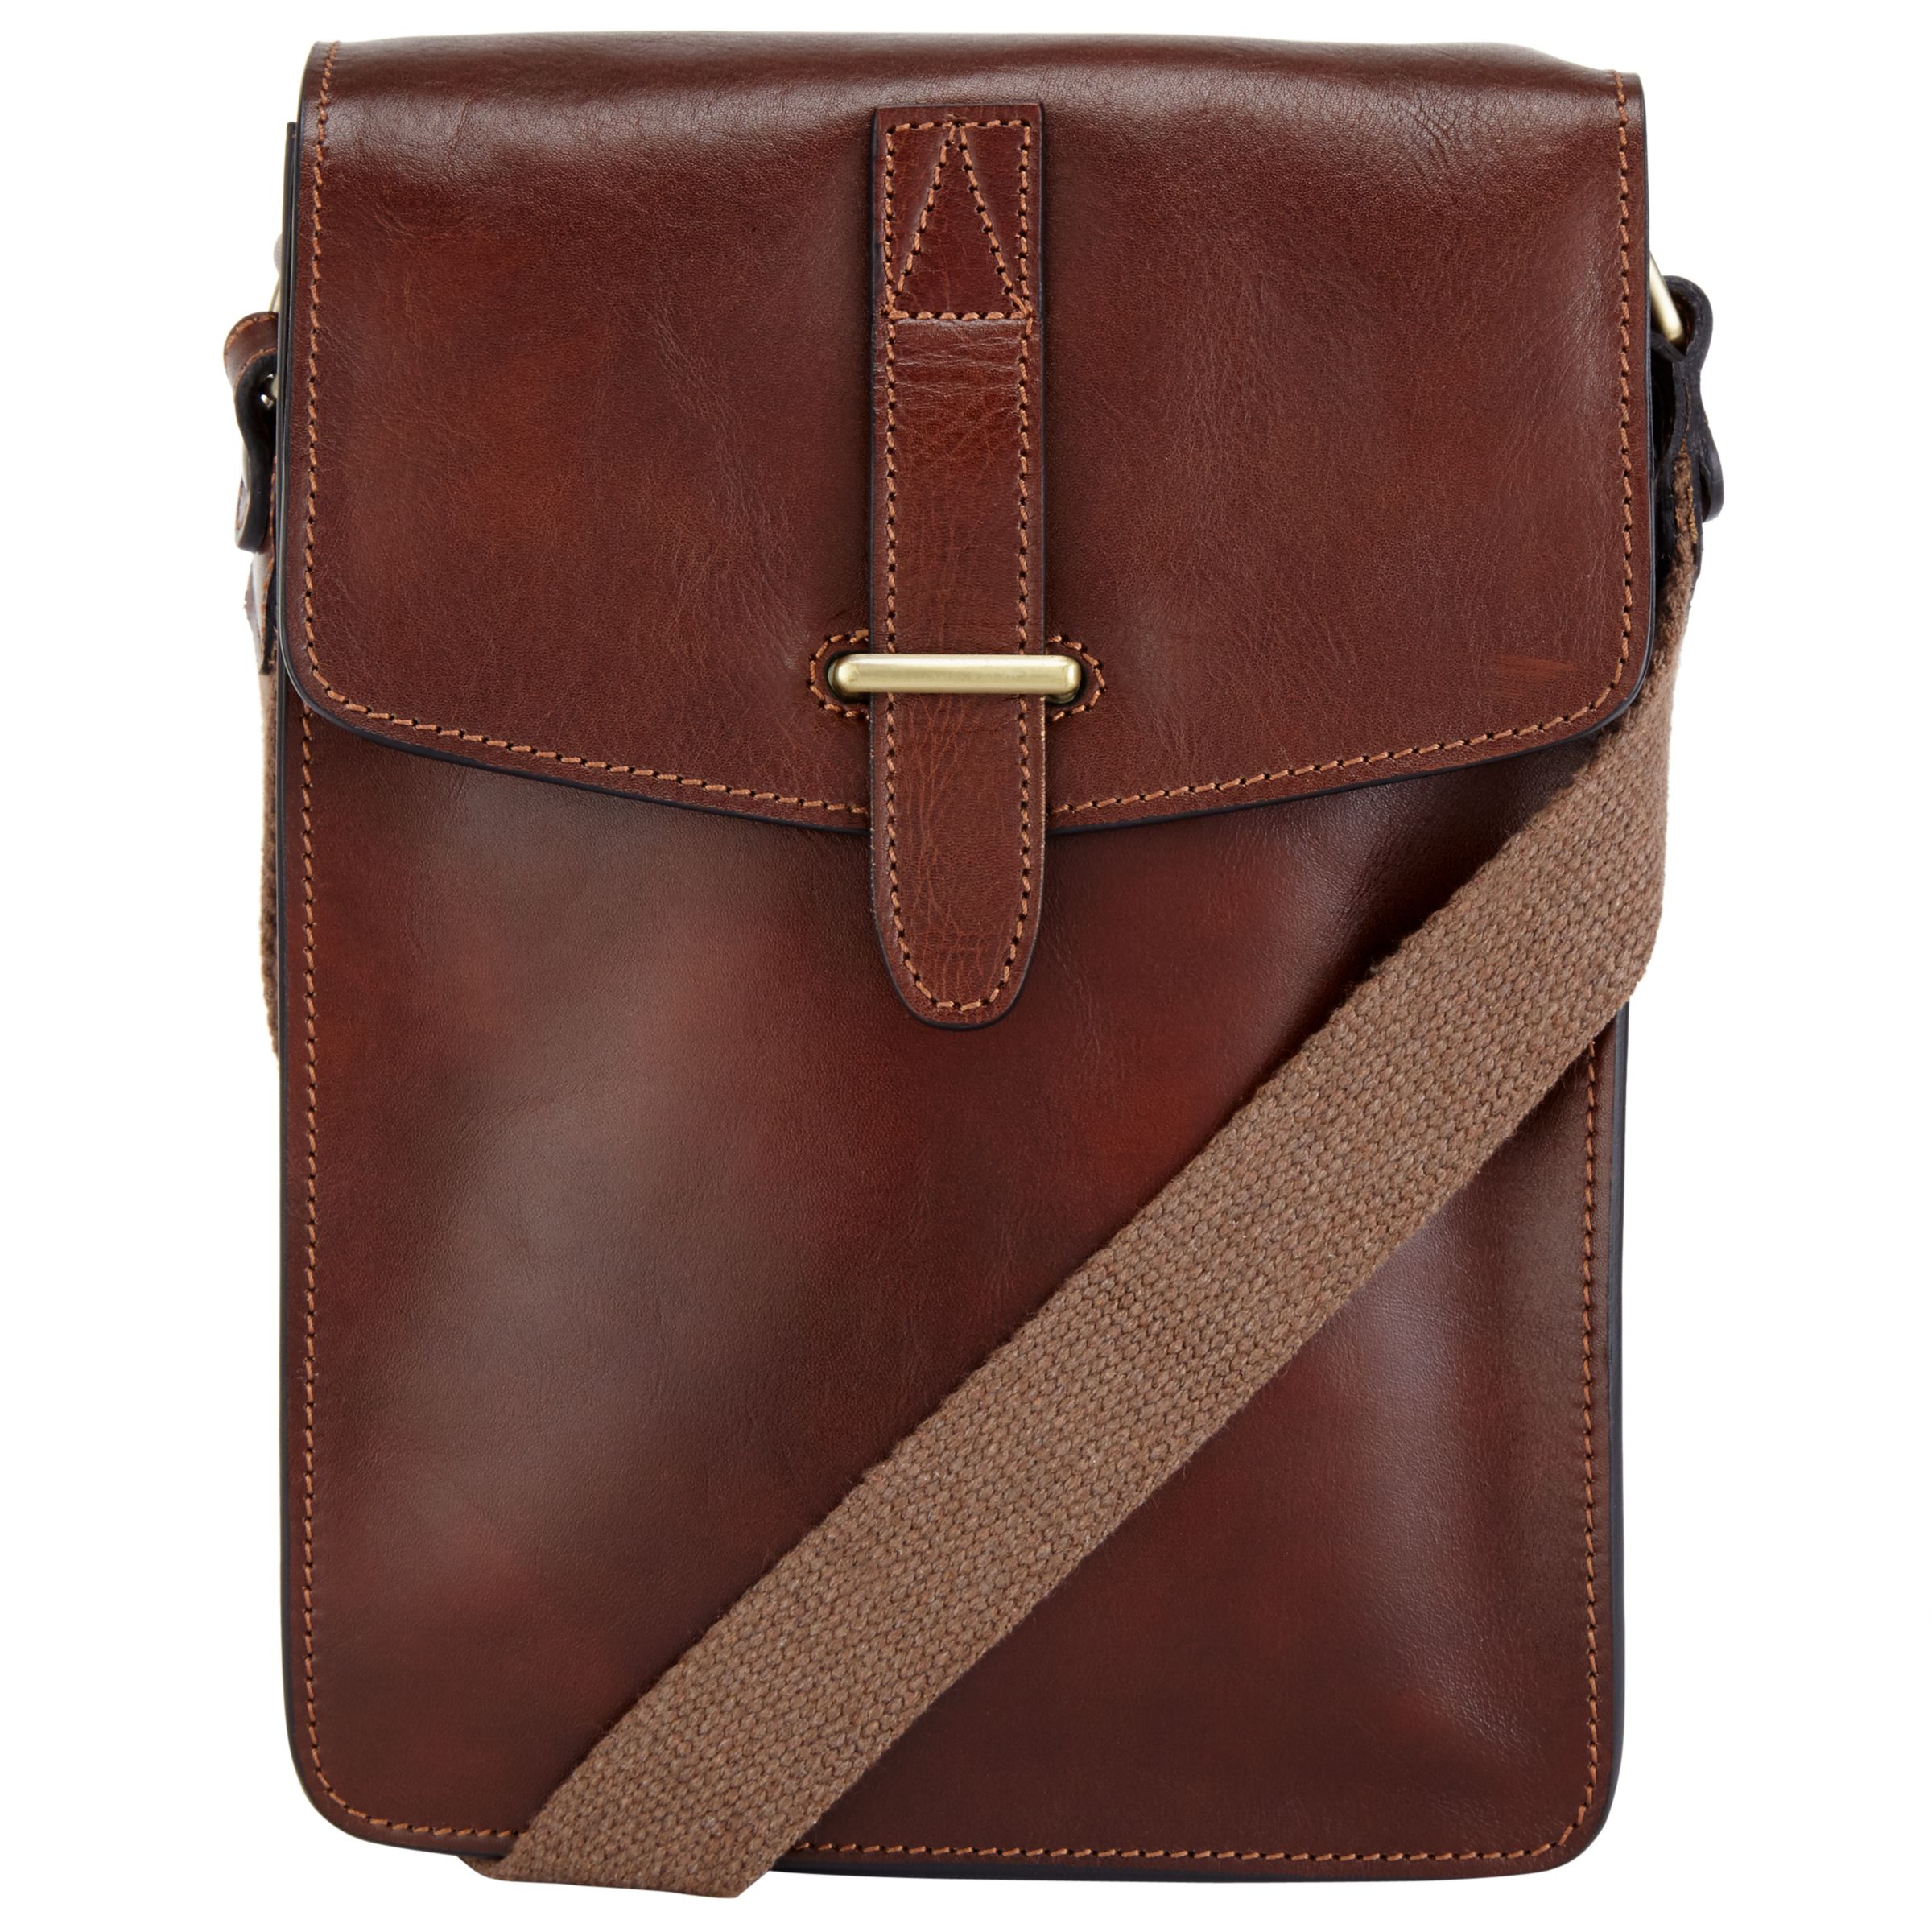 John Lewis Made in Italy Leather Reporter Bag, Brown at John Lewis